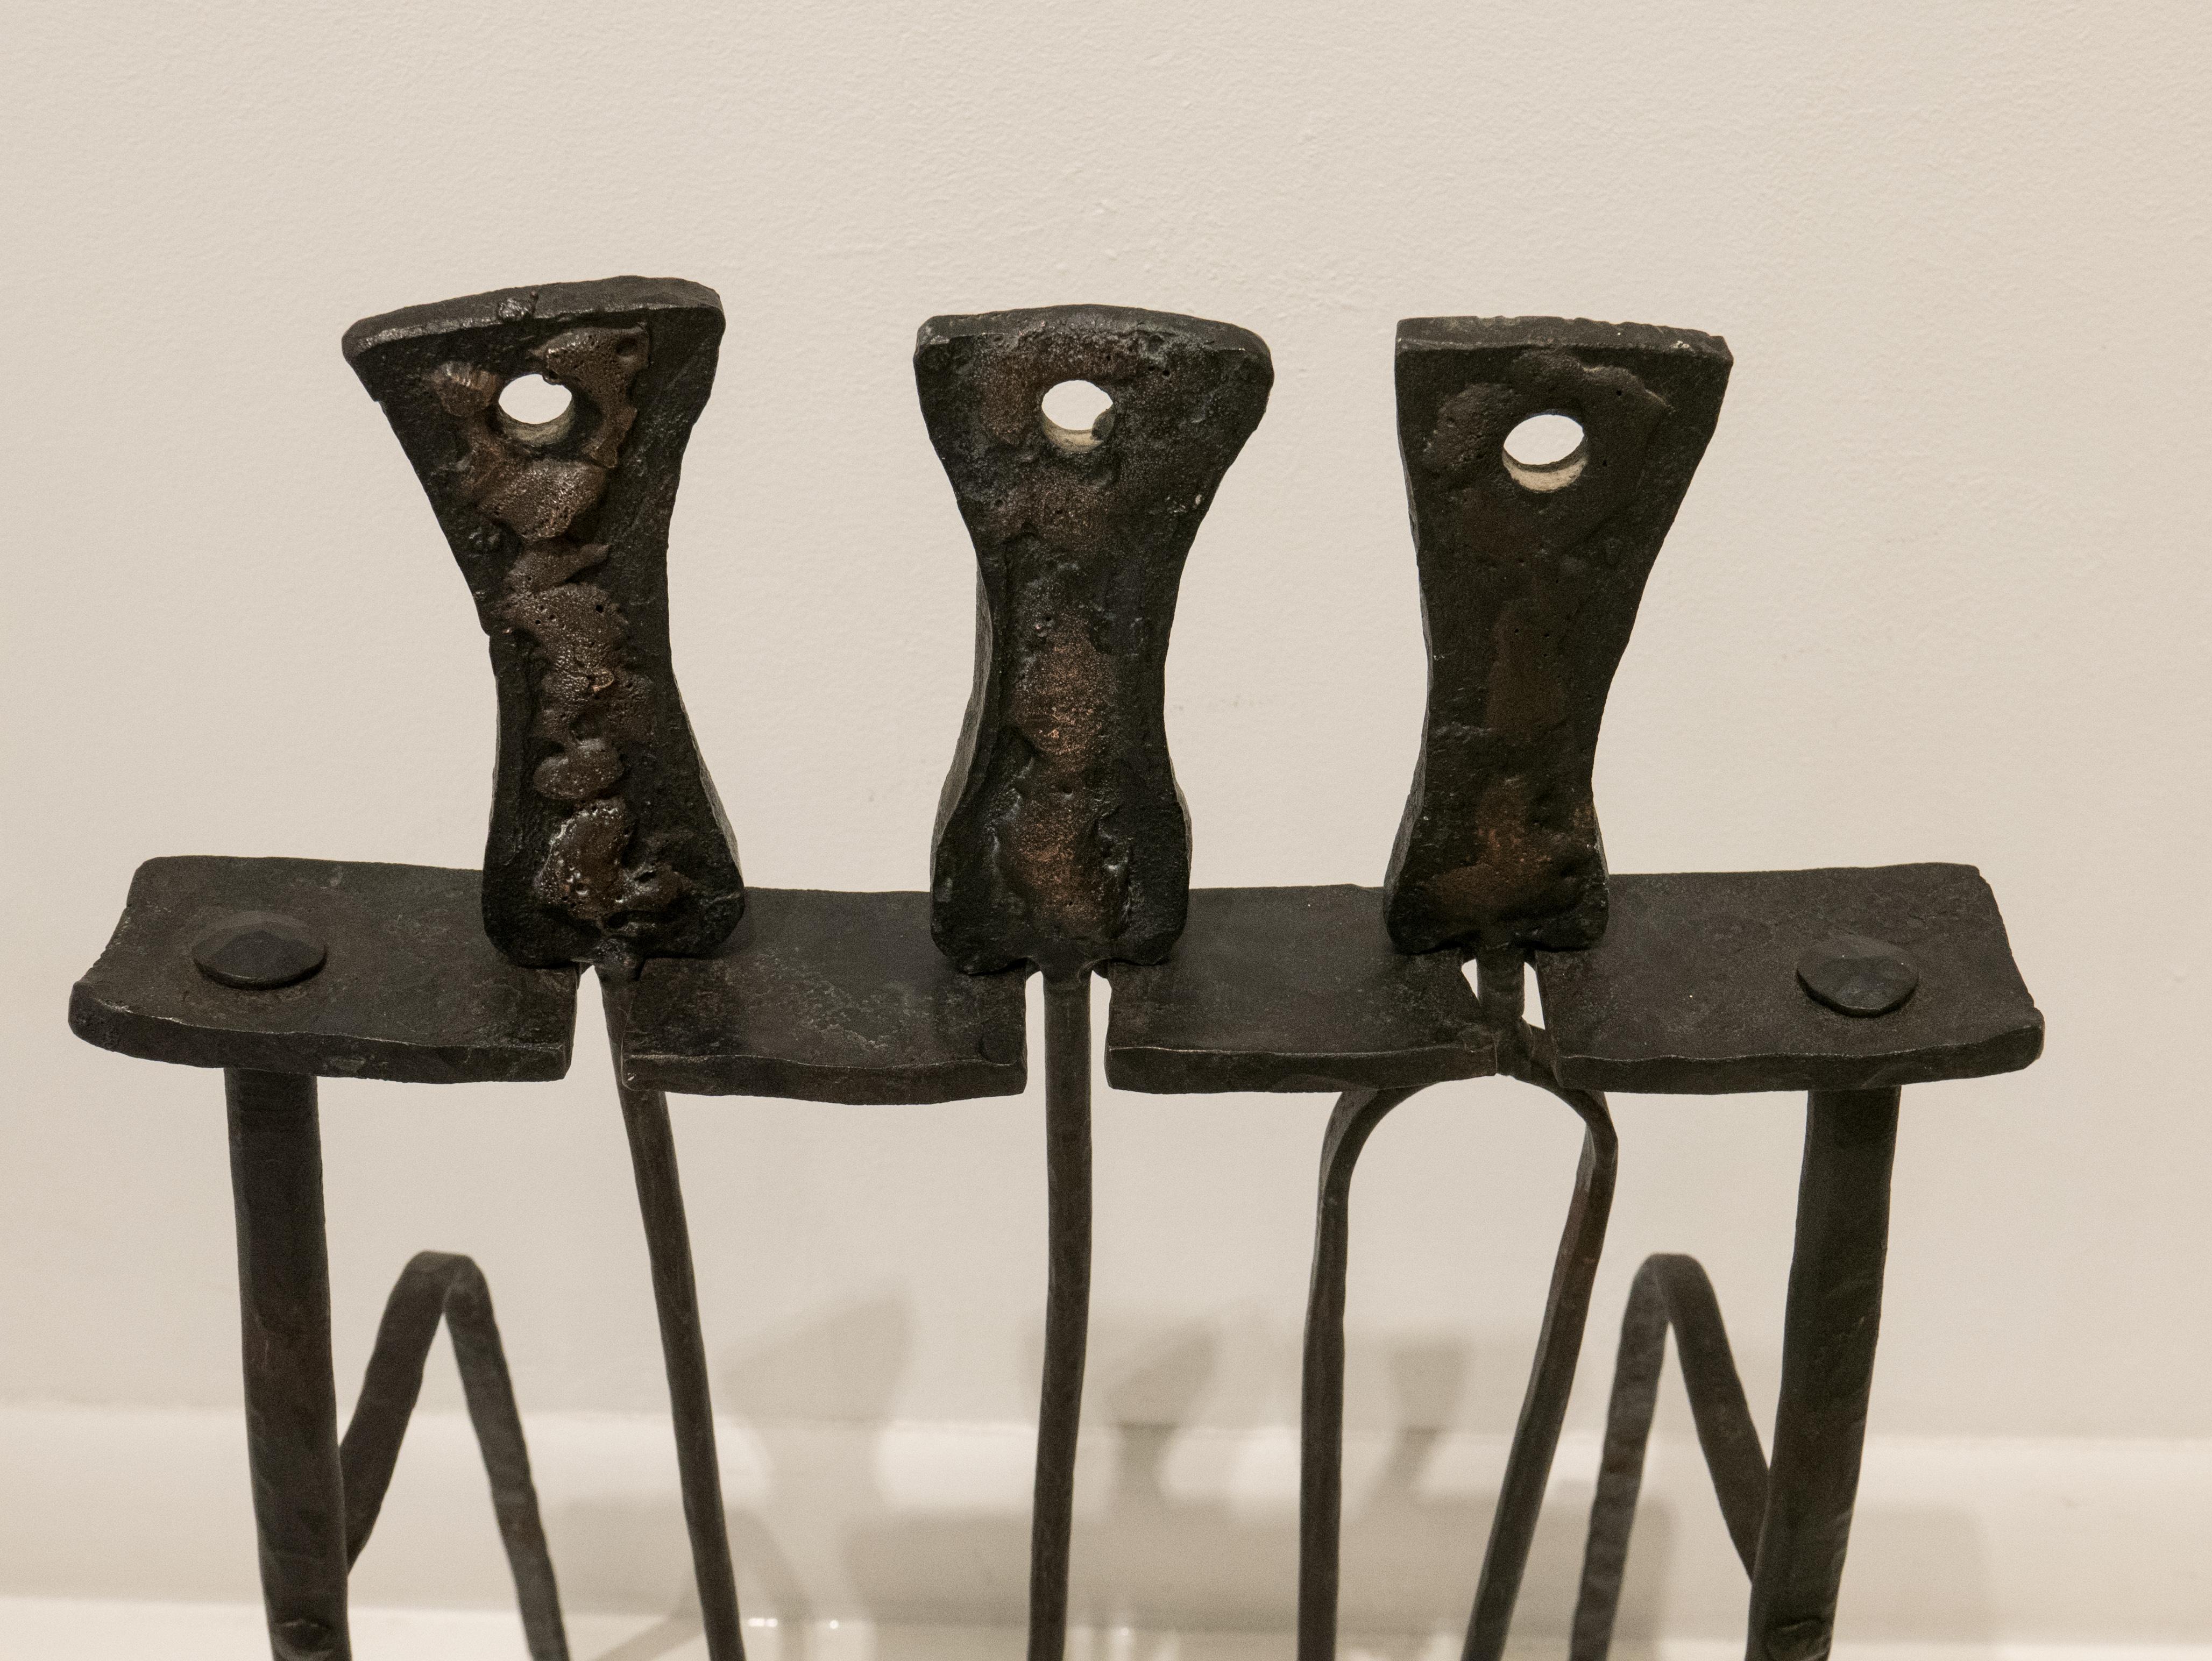 Wrought Iron Brutalist Fireplace Tool Set